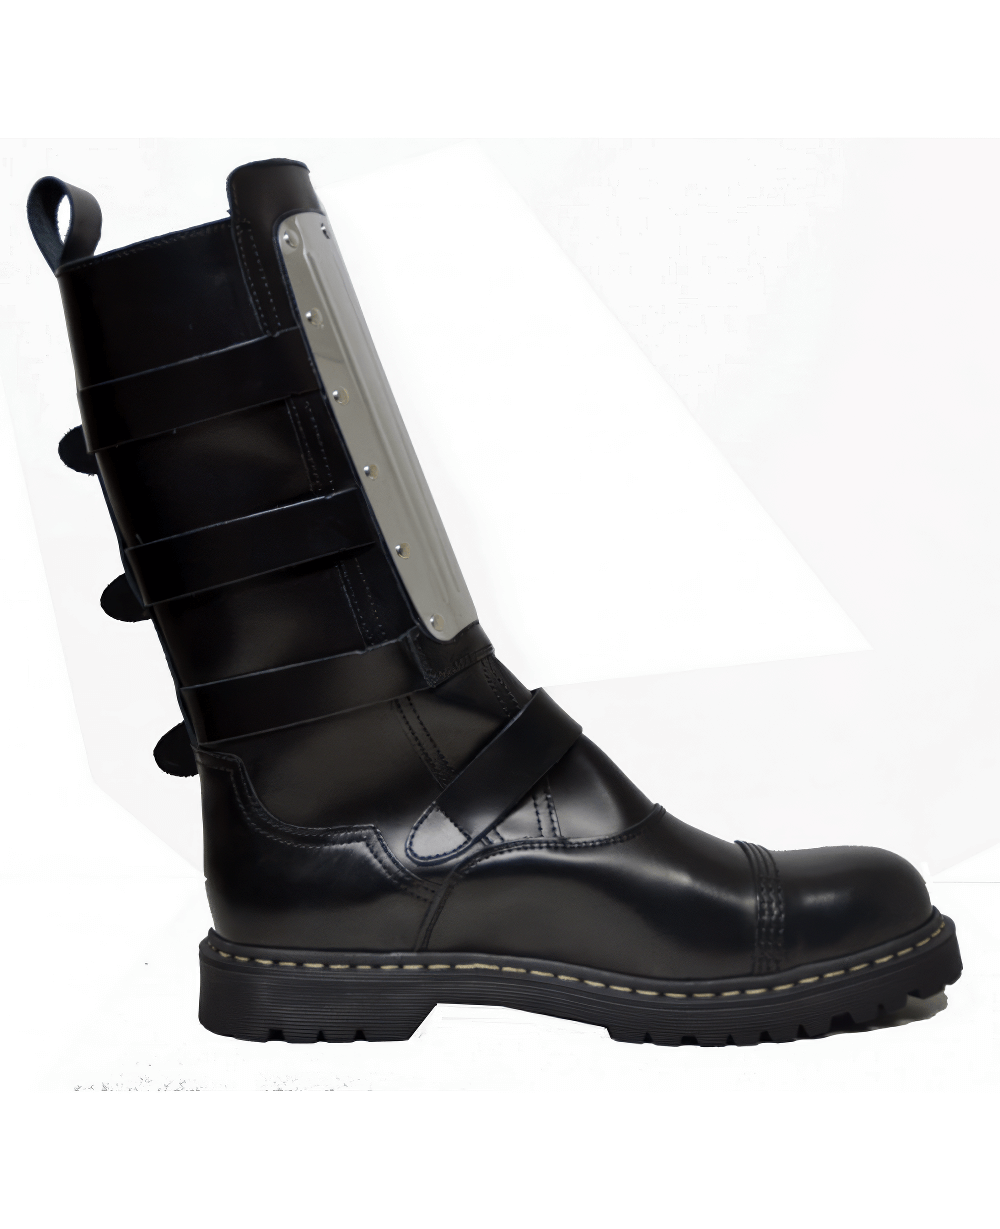 Unisex Black Leather Boots with Flat Sole in Biker Style